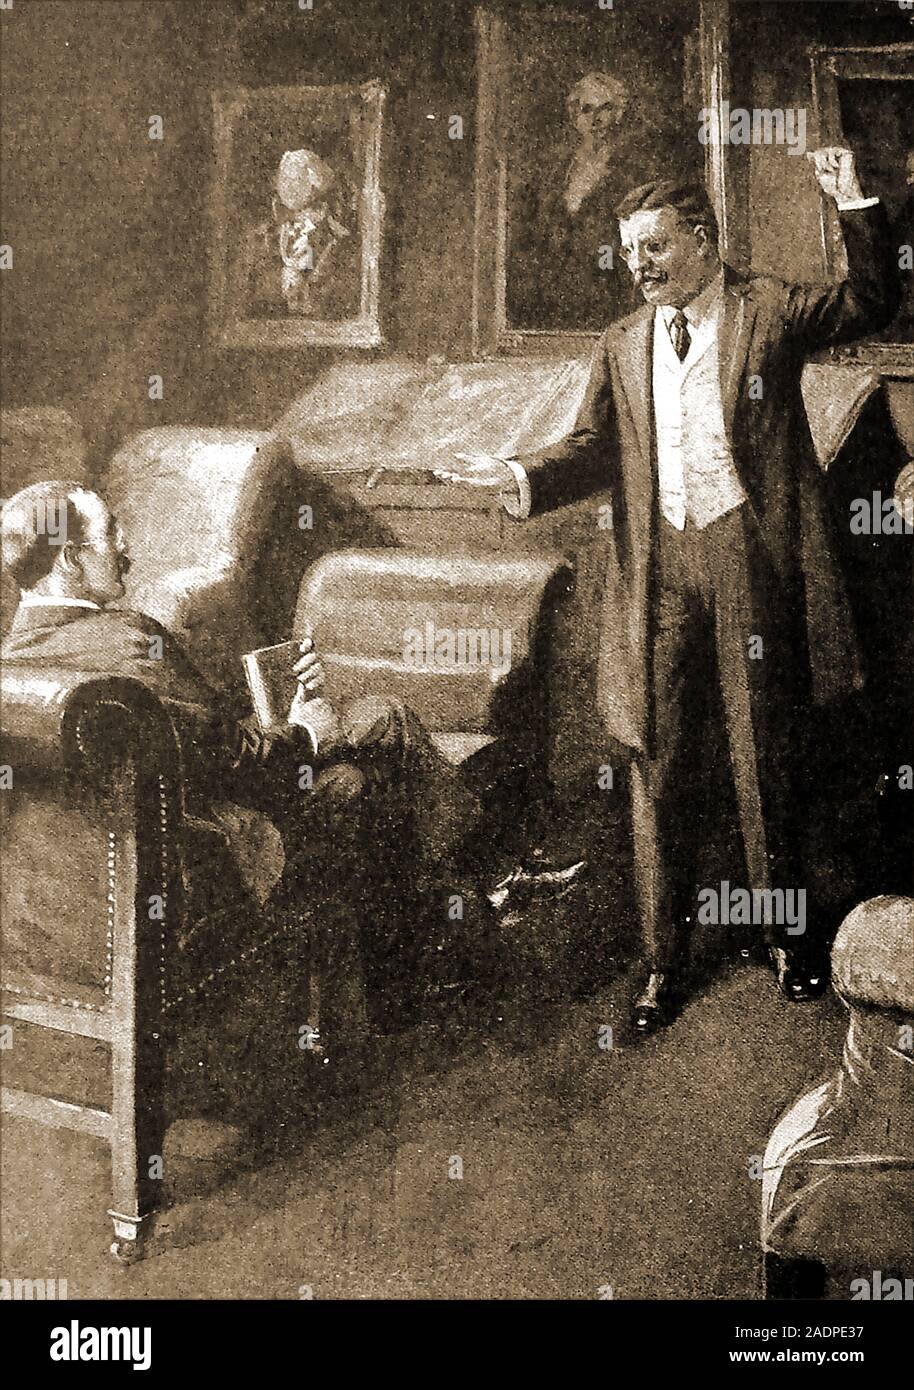 A circa 1945 printed image of Theodore Roosevelt , 26th President of the United States and 33rd governor of New York  (standing) meeting with Rudyard Kipling at the Cosmos Club, Washington, USA as they evidently did from time to time before his death in 1919. The Cosmos Club's goals were evidently 'The advancement of its members in science, literature, and art'. Since 1964 (in a different location), The Cosmos Club has given out prestigious awards. Recipients include Notable recipients have included Edwin Land, Paul Volcker,  Everett Koop, James Van Allen, Arthur Kornberg, Sandra Day O'Connor. Stock Photo